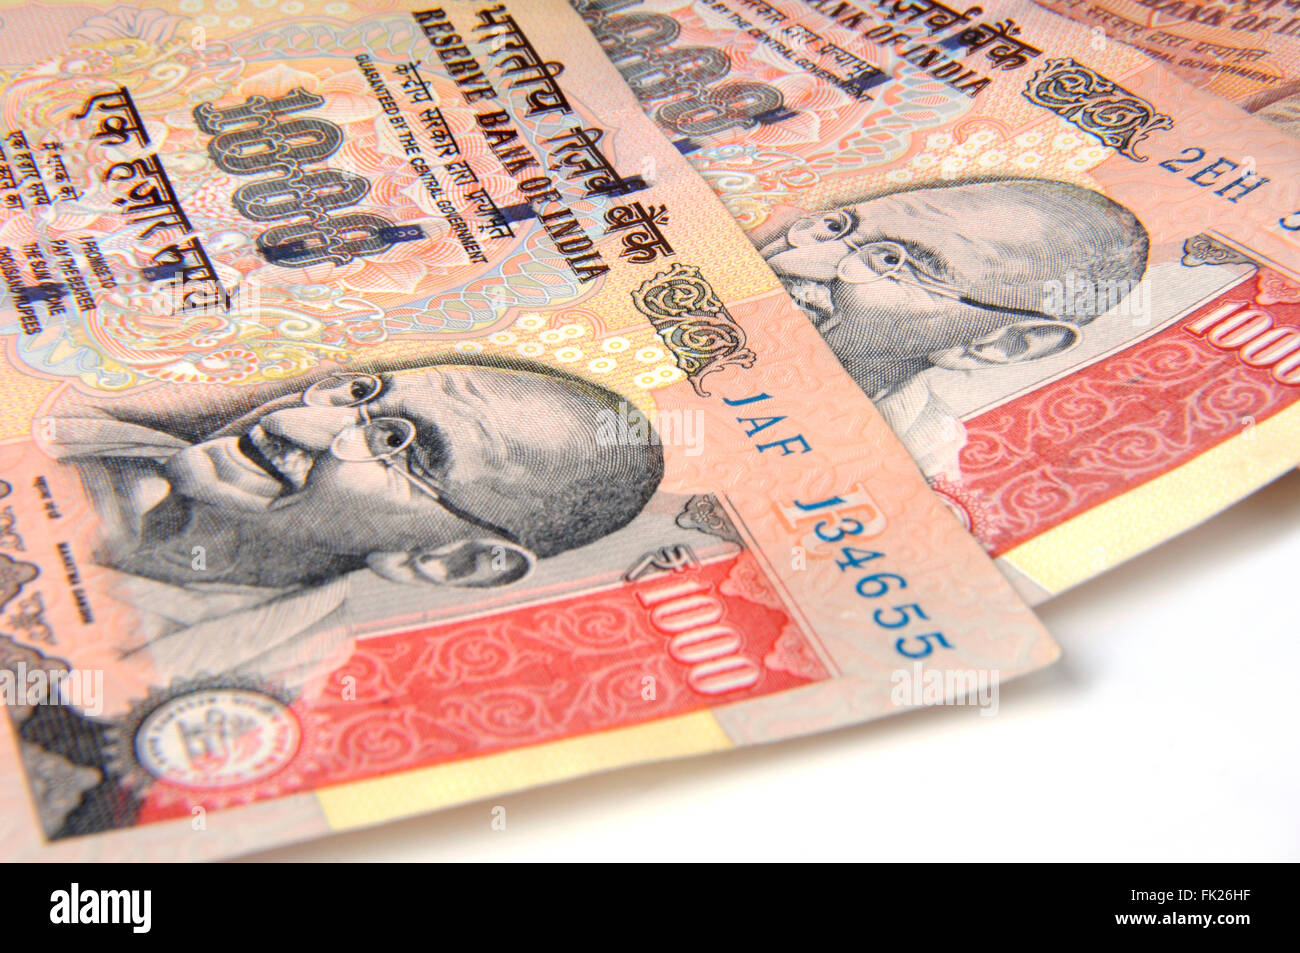 A one thousand rupee notes (Indian Currency) Stock Photo